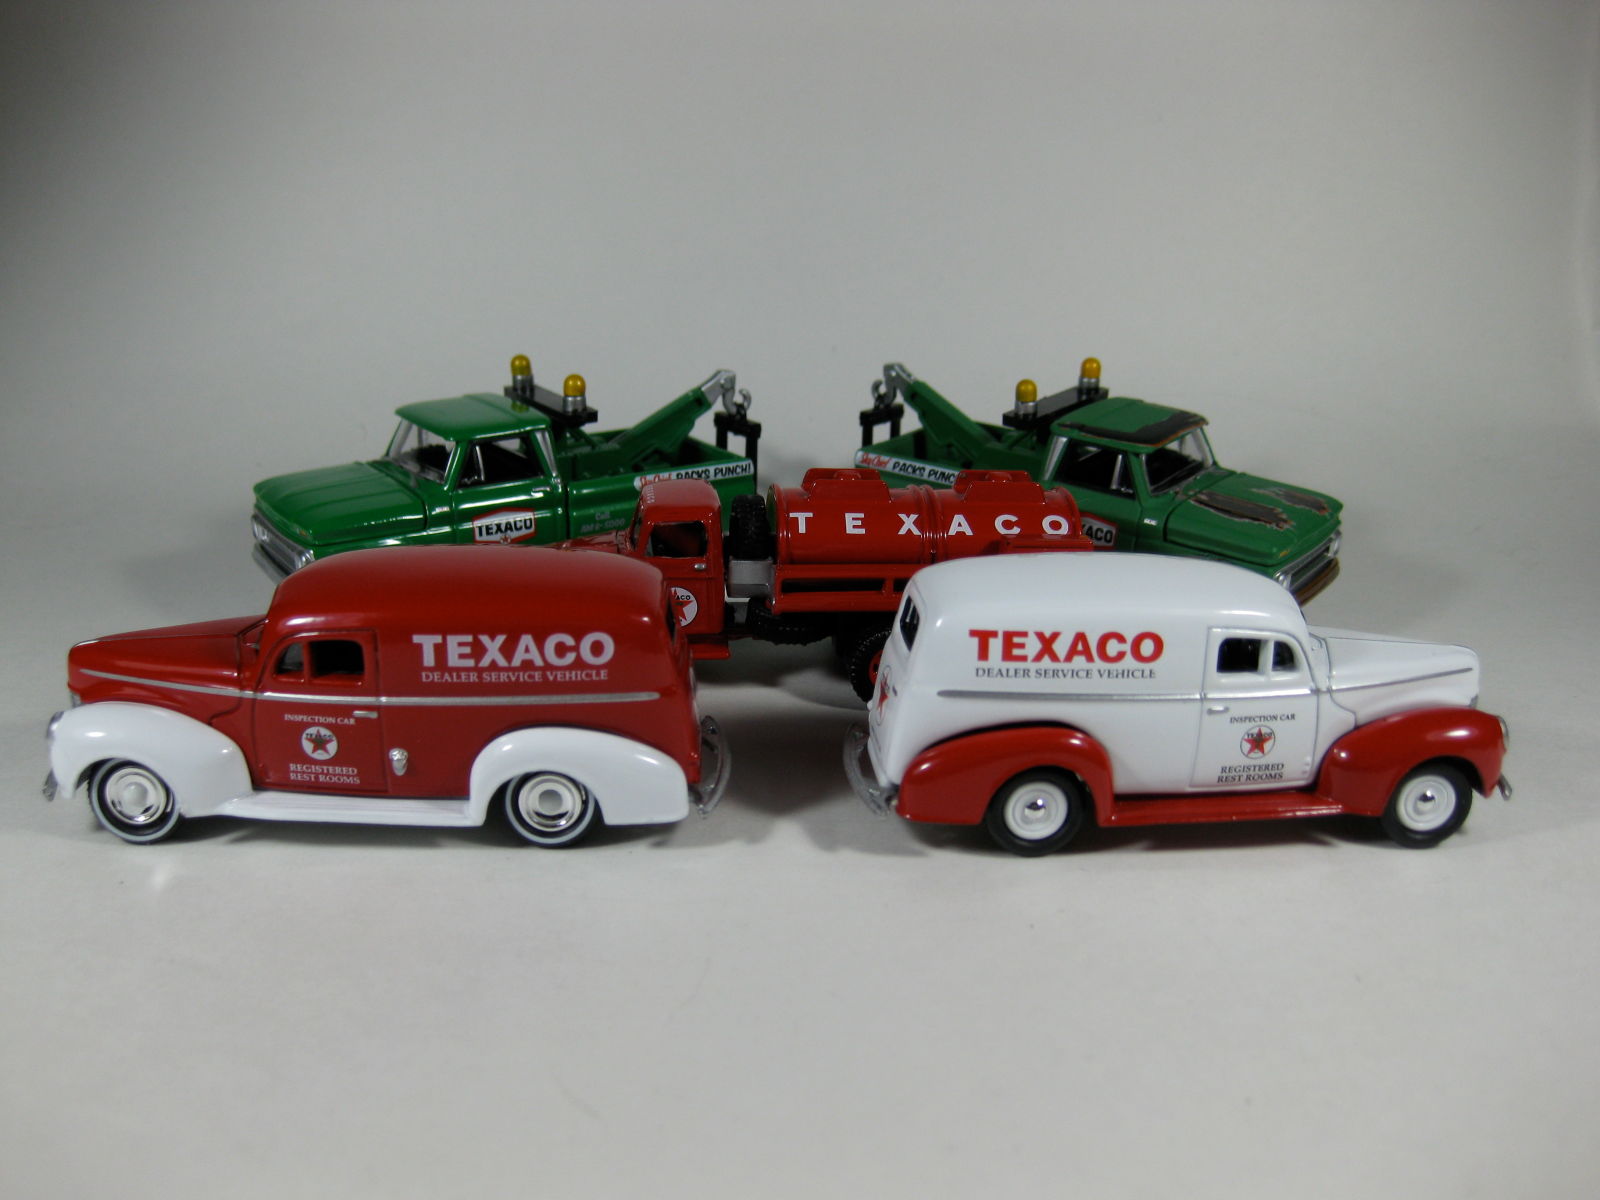 Illustration for article titled The fleet is in...Texaco fleet that is. (pic heavy, as usual)